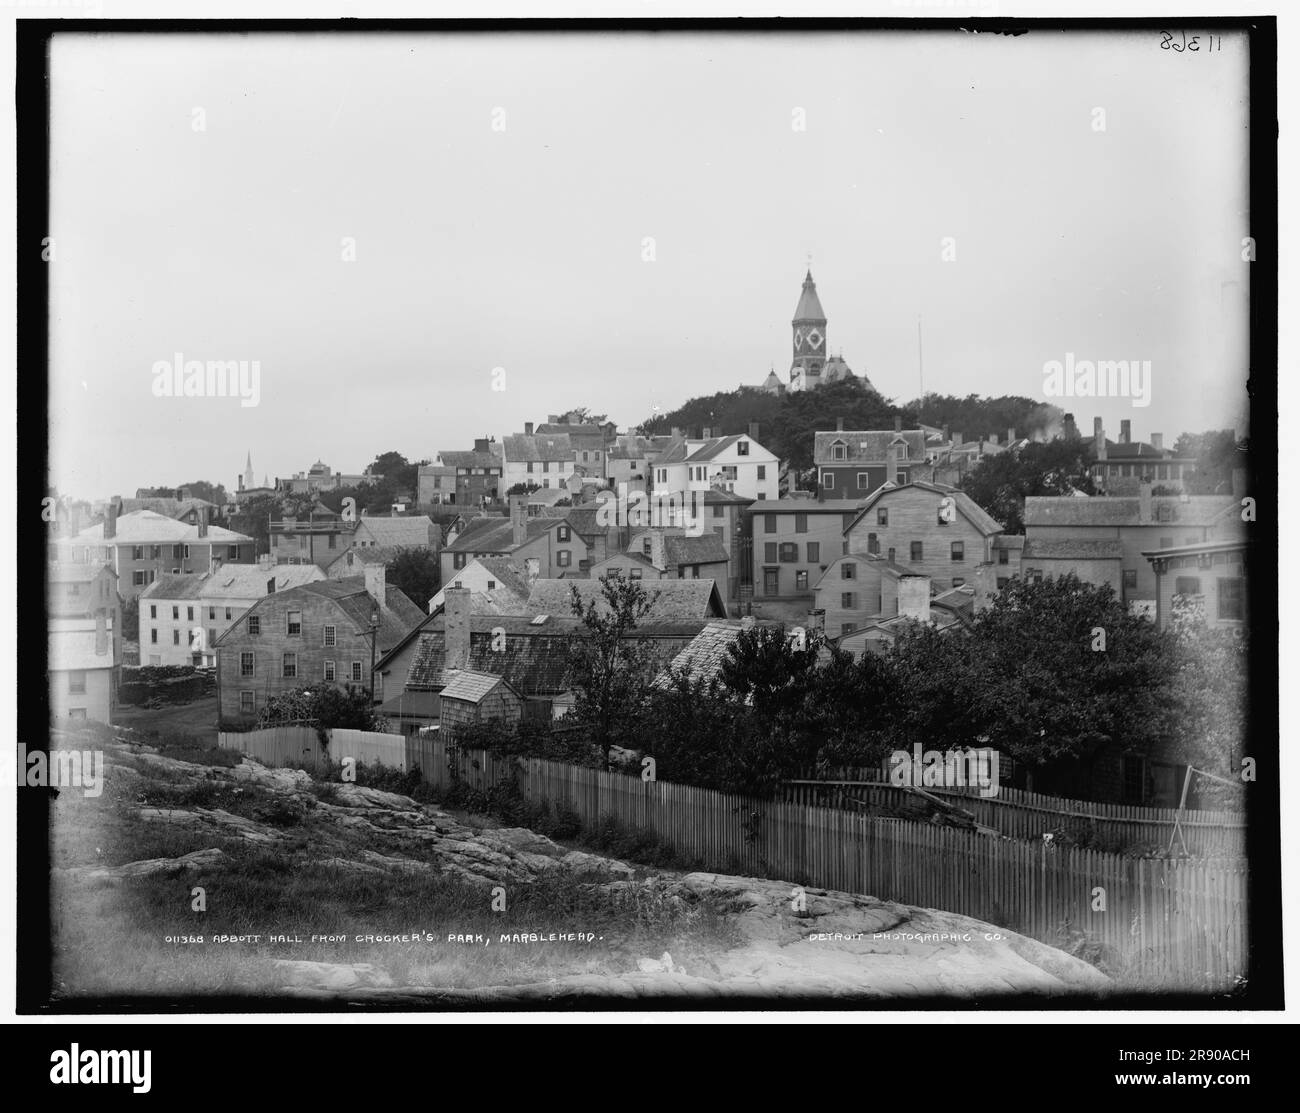 Abbott [sic] Hall from Crocker's Park, Marblehead, between 1890 and 1899. Stock Photo